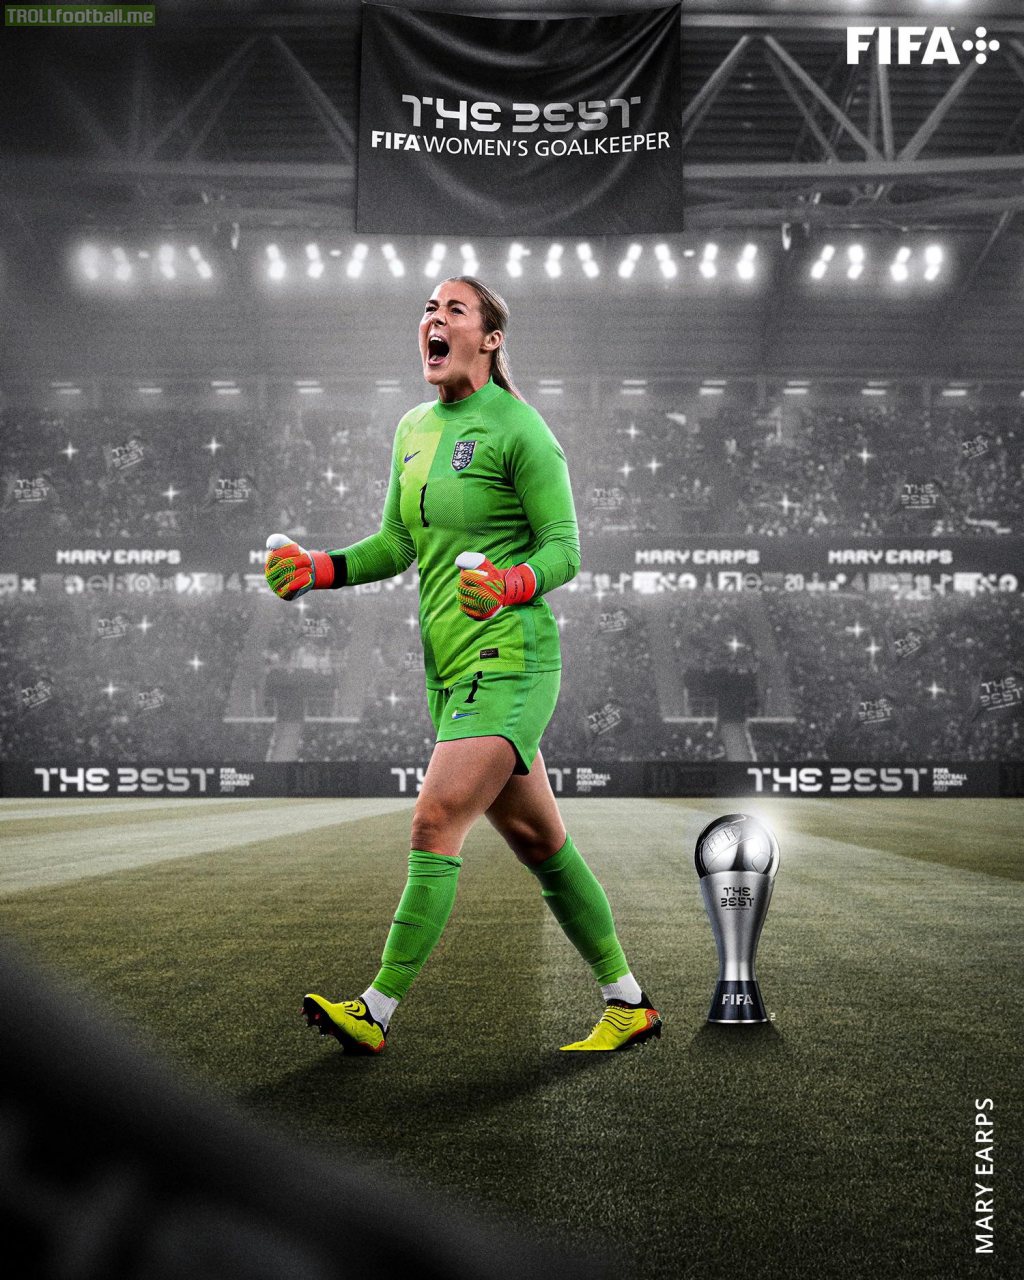 Mary Earps has been named #TheBest FIFA Women's Goalkeeper 2022!